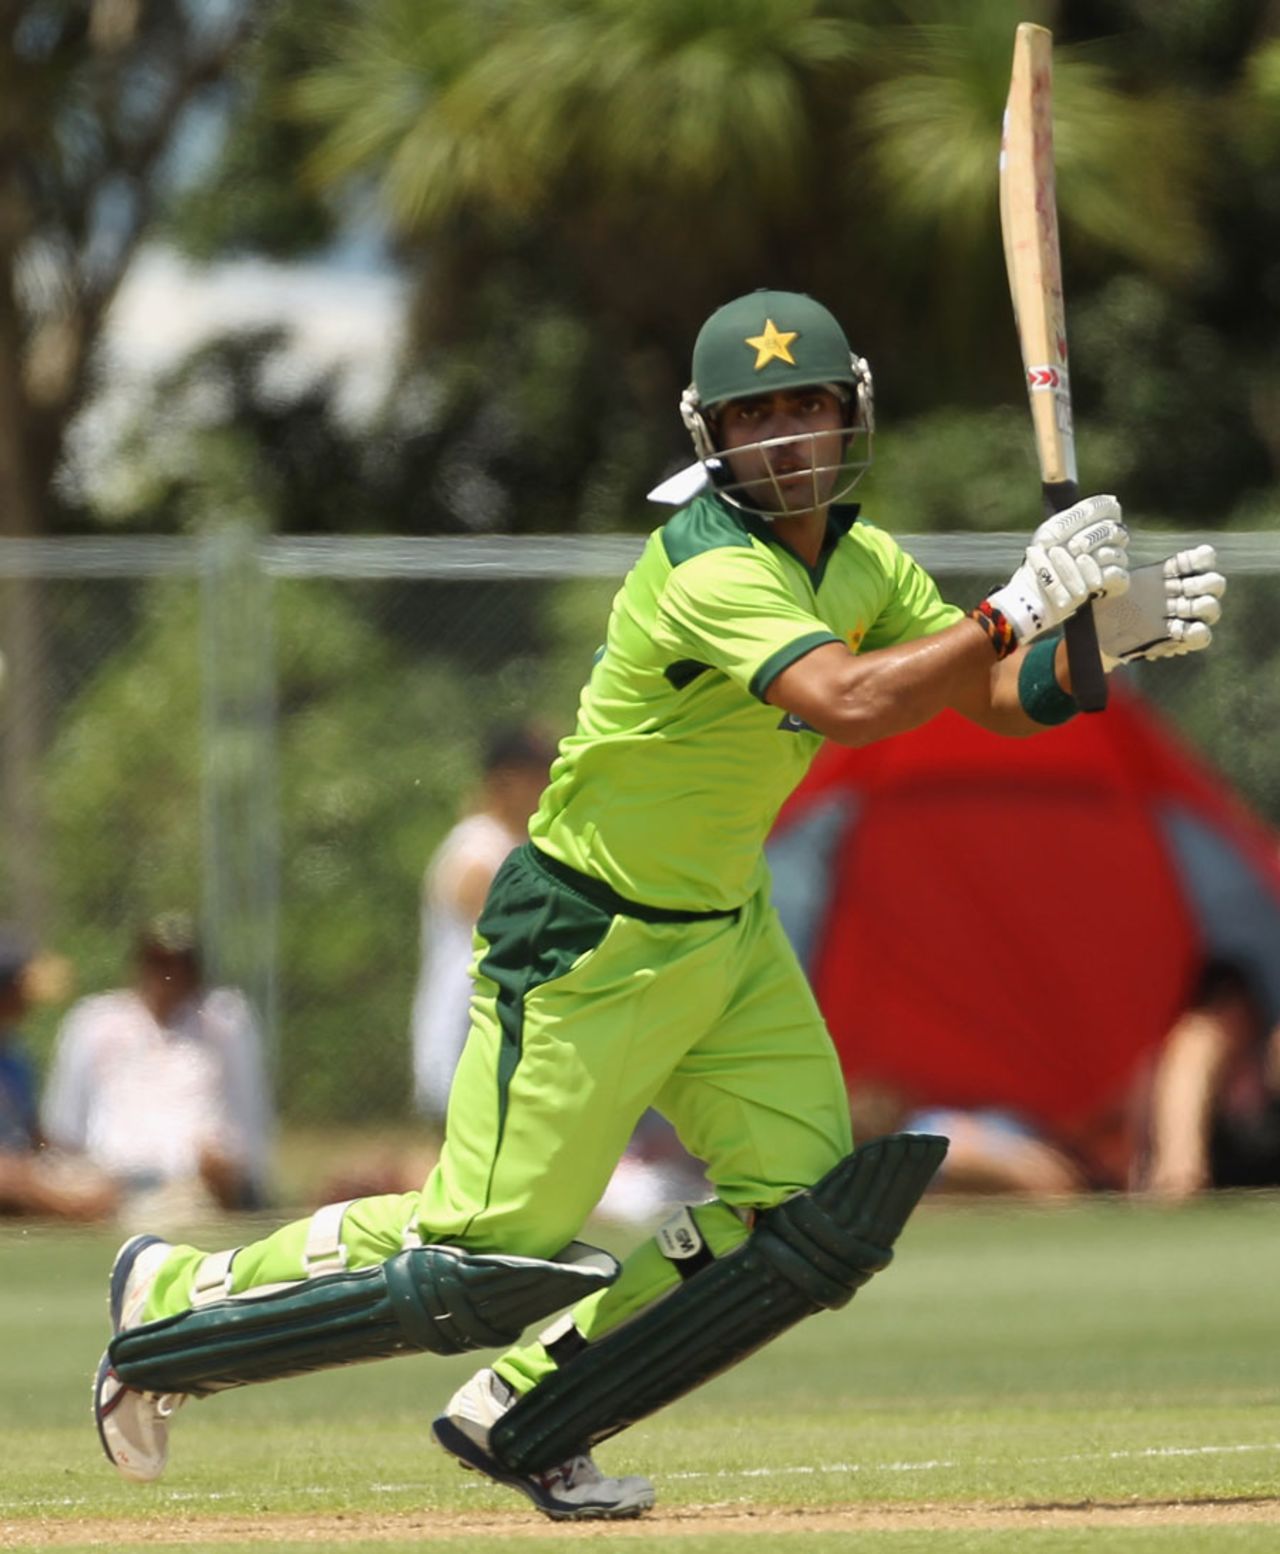 Umar Akmal hits one square on the off side, Auckland v Pakistanis, Twenty20, Auckland, December 23, 2010